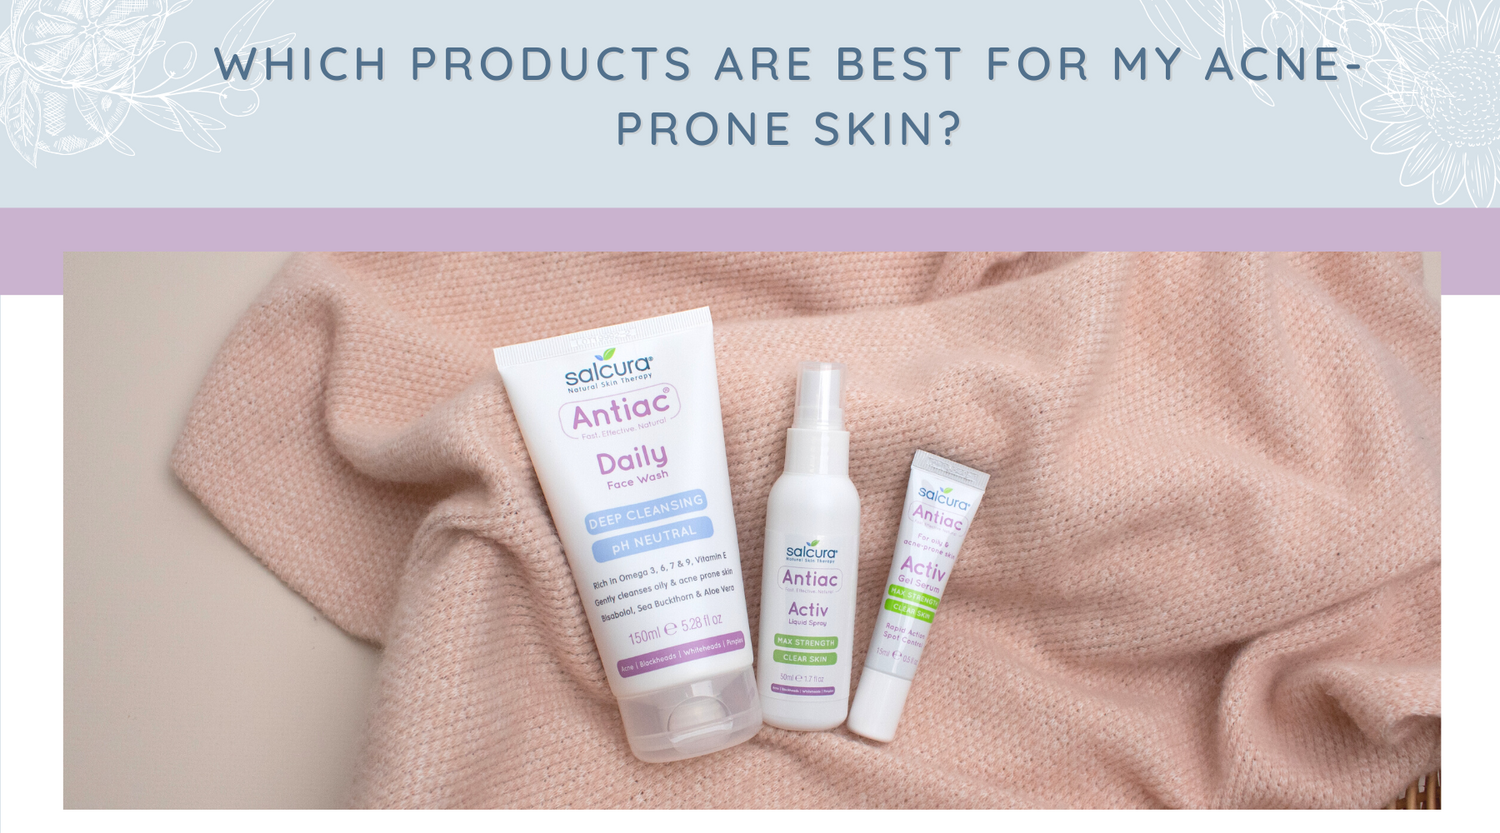 Which products are best for my acne-prone skin?